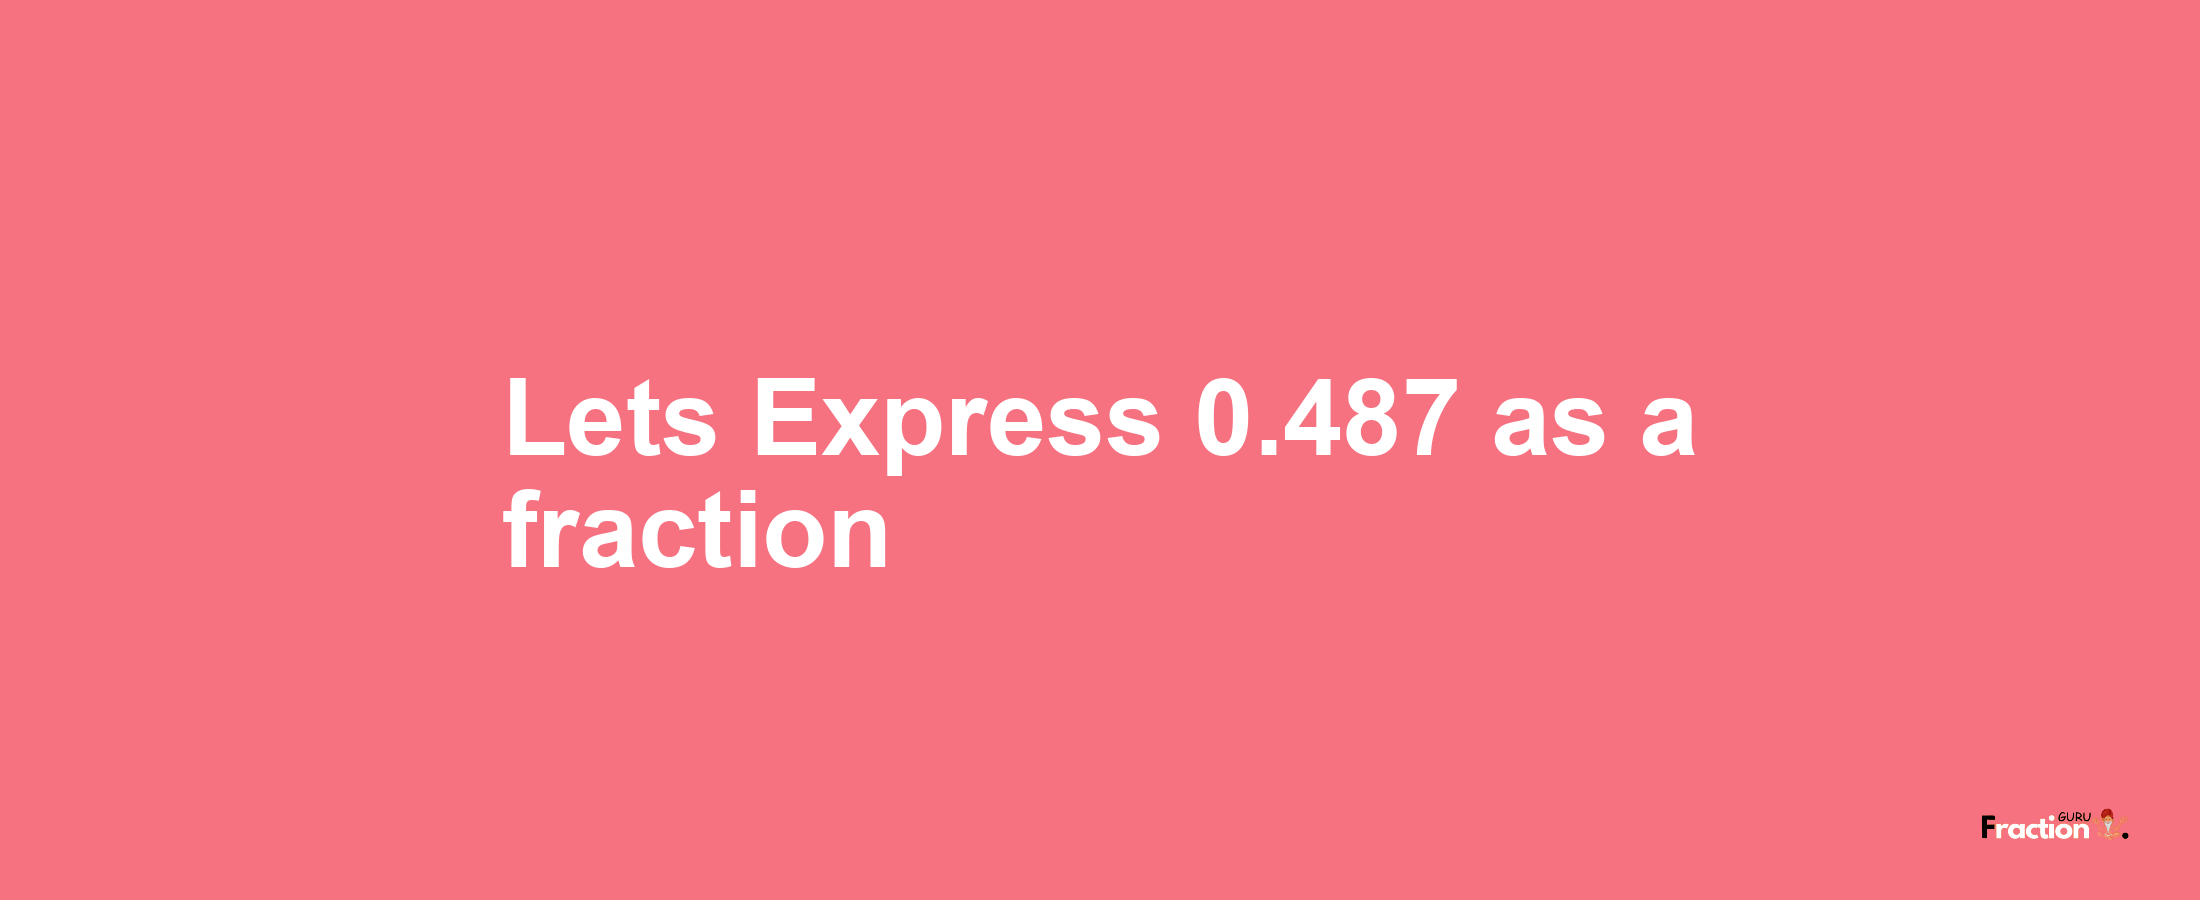 Lets Express 0.487 as afraction